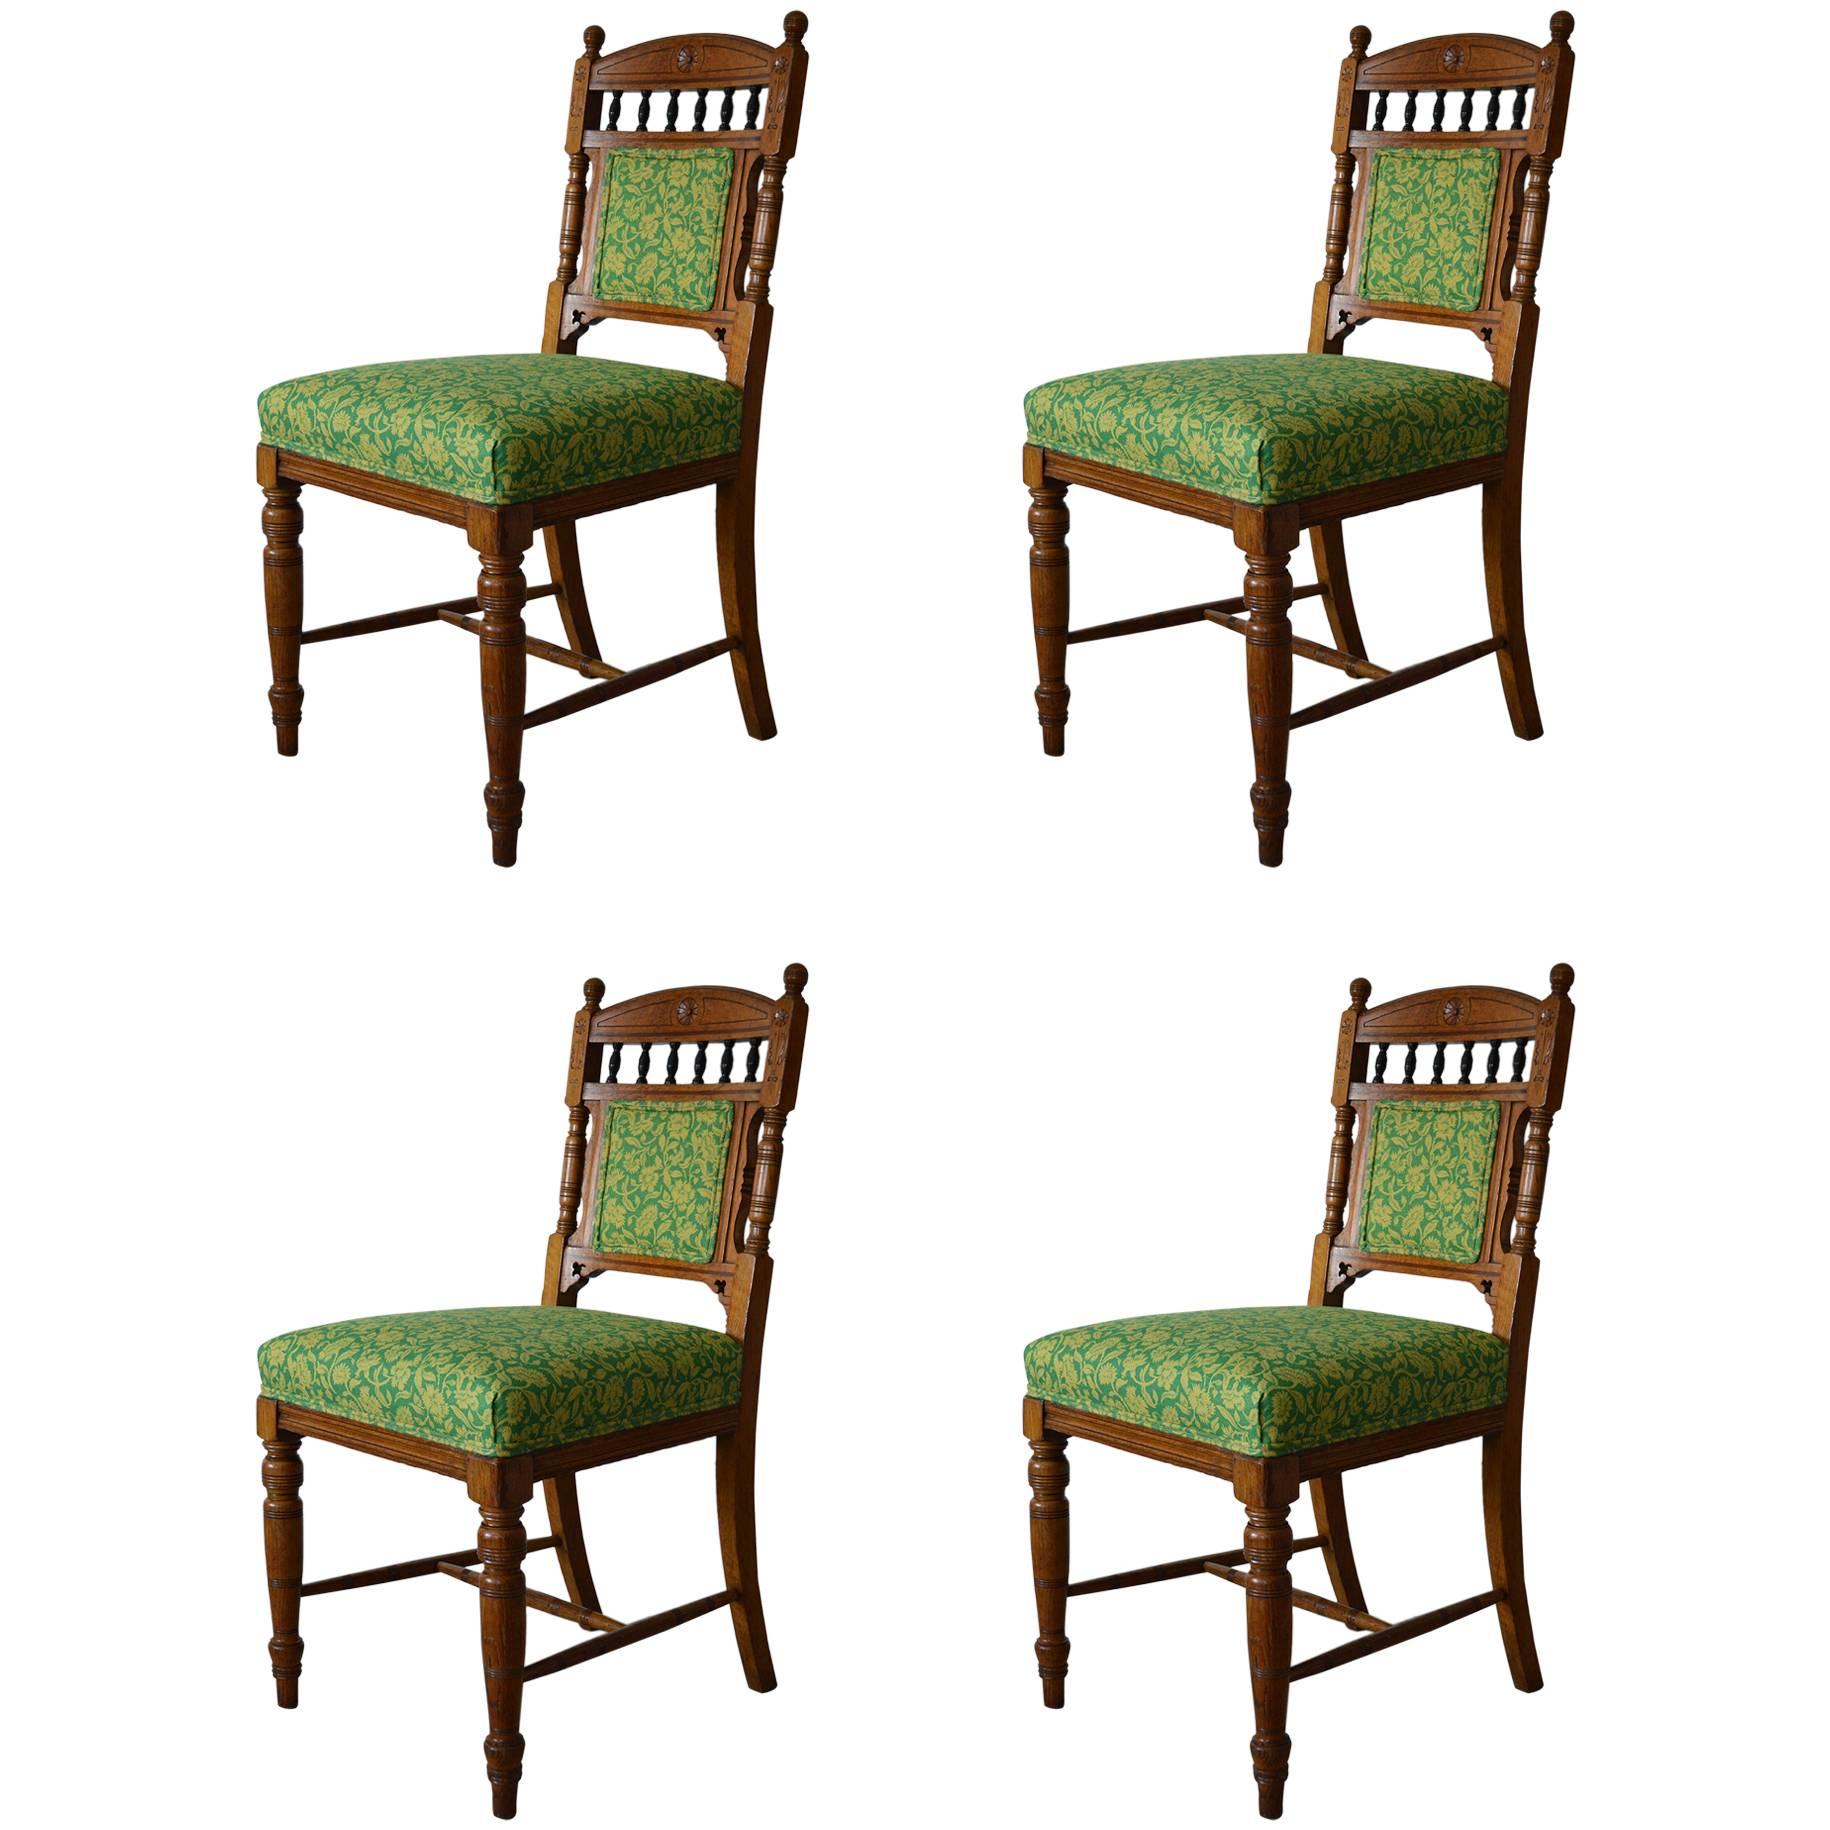 Set of Four Antique Aesthetic Style Chairs, English, circa 1900